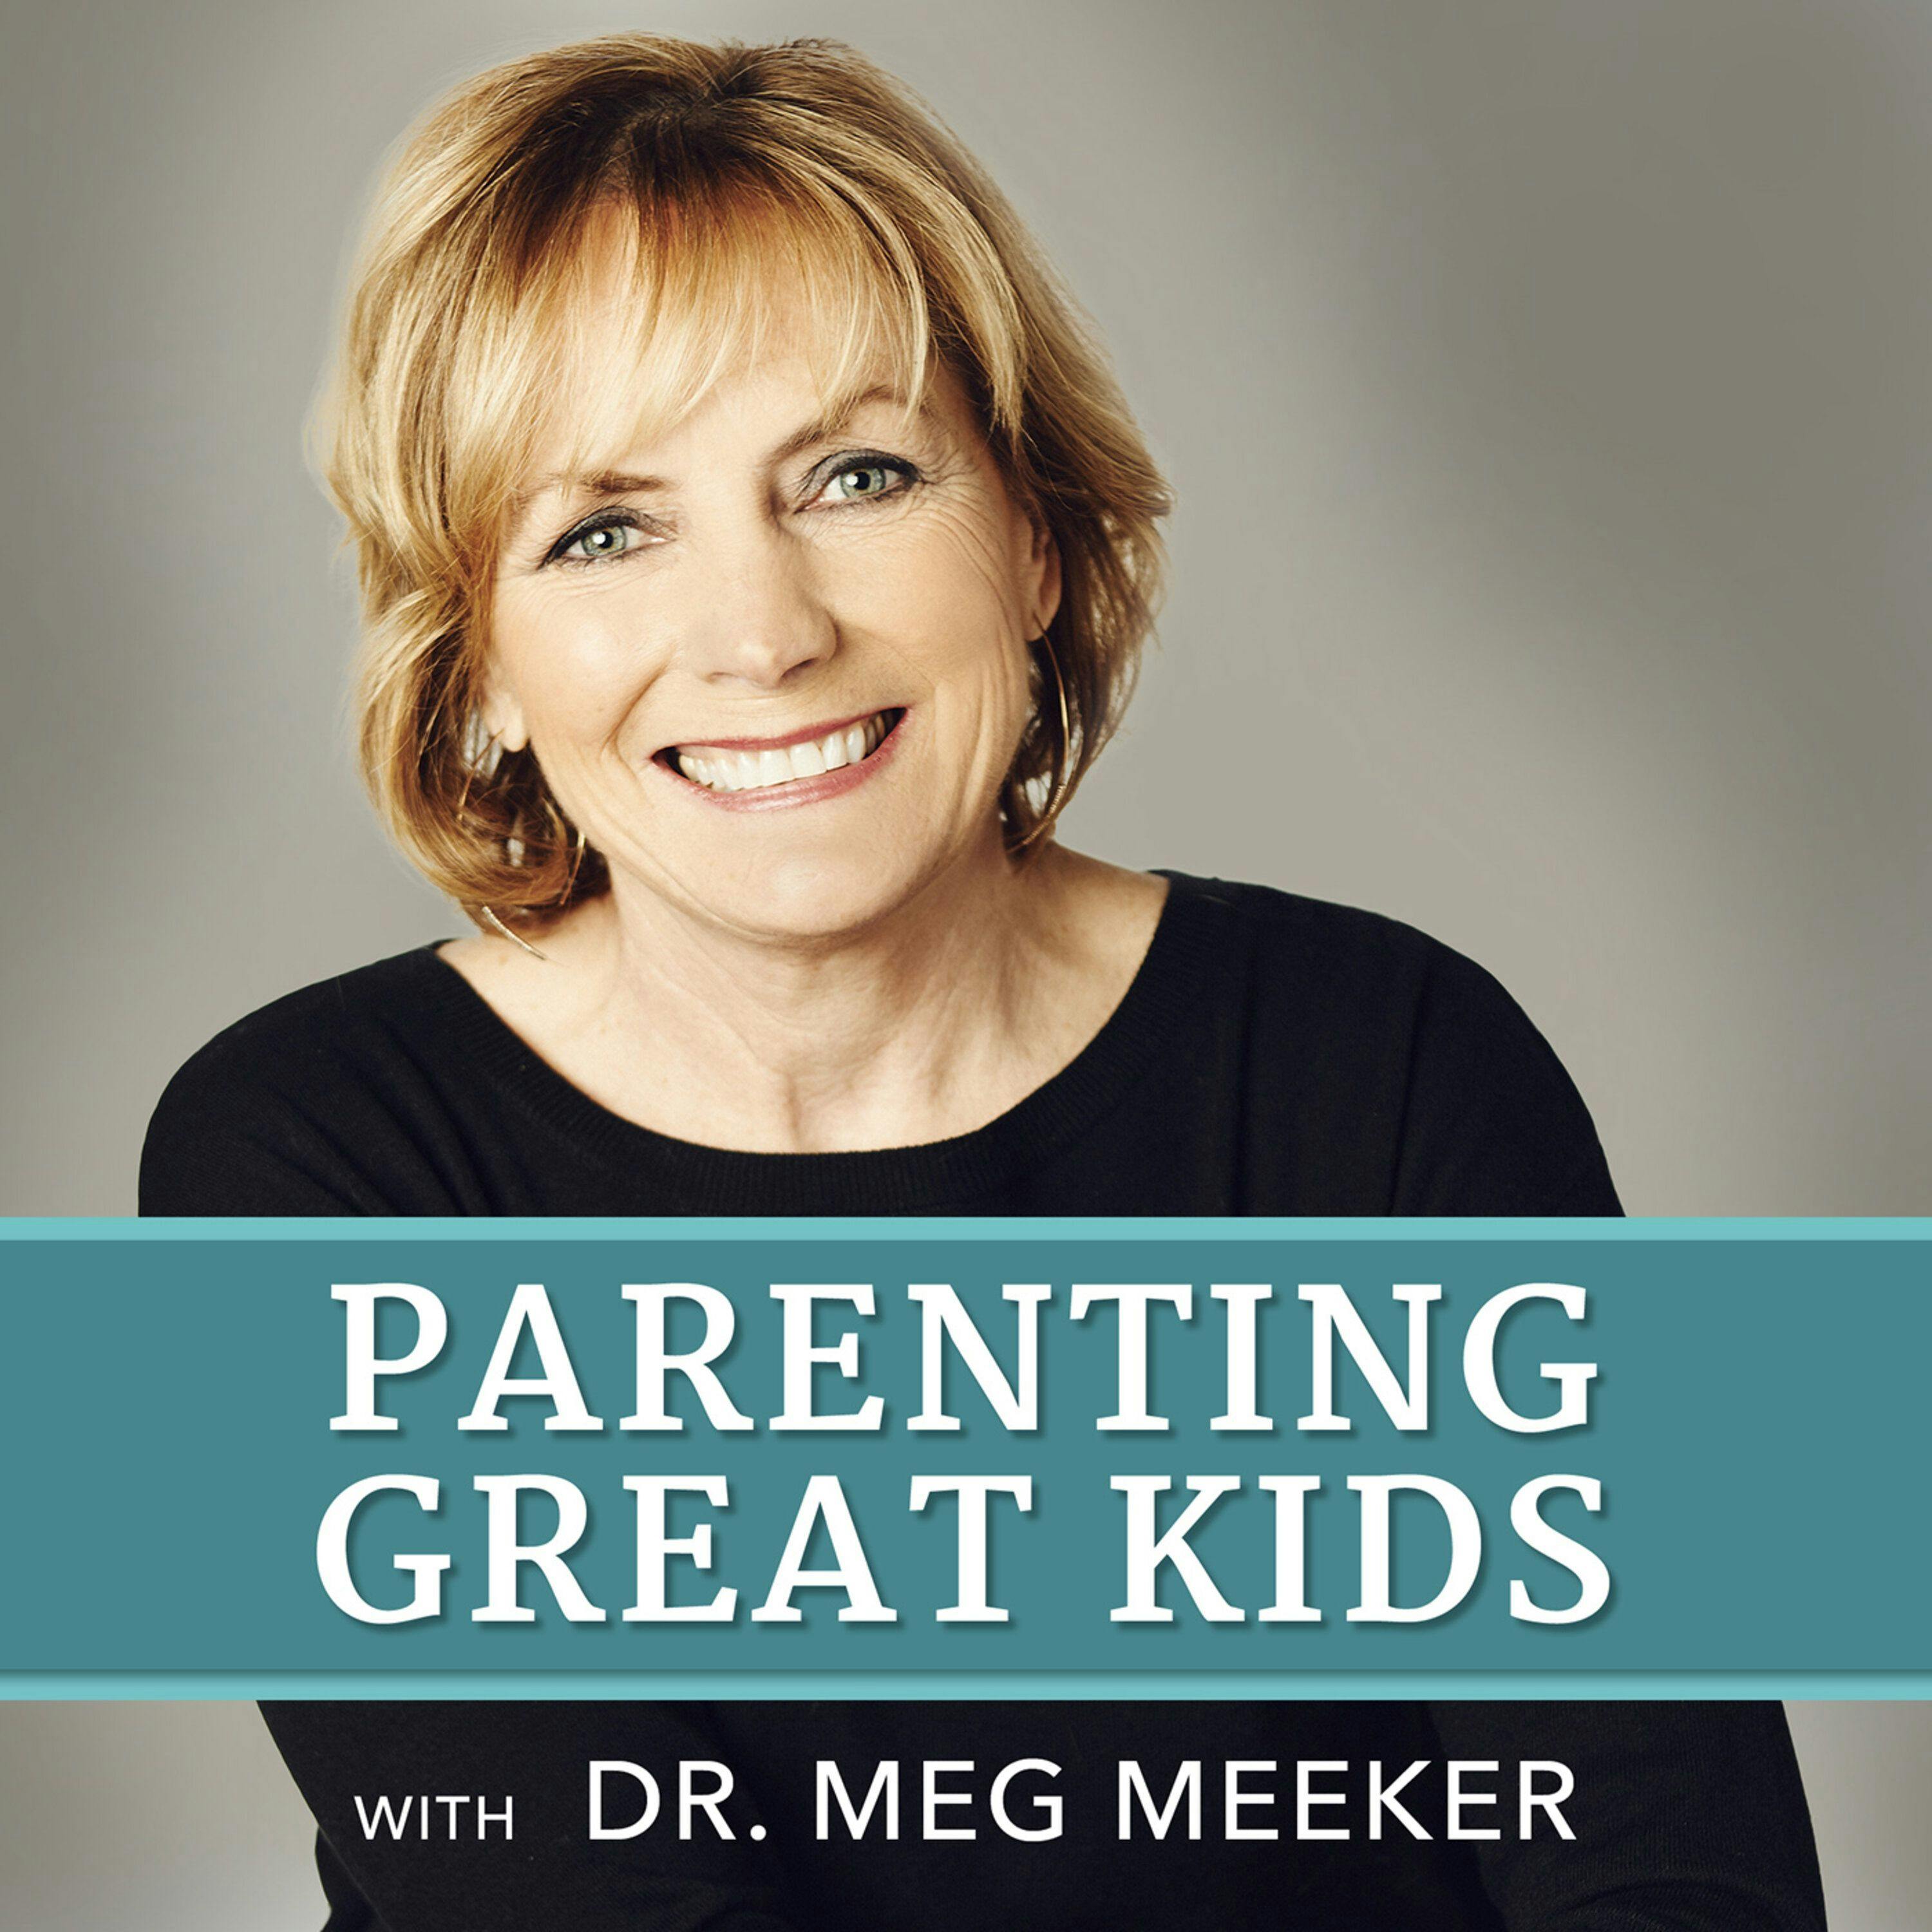 #1: What Your Kids Want Most